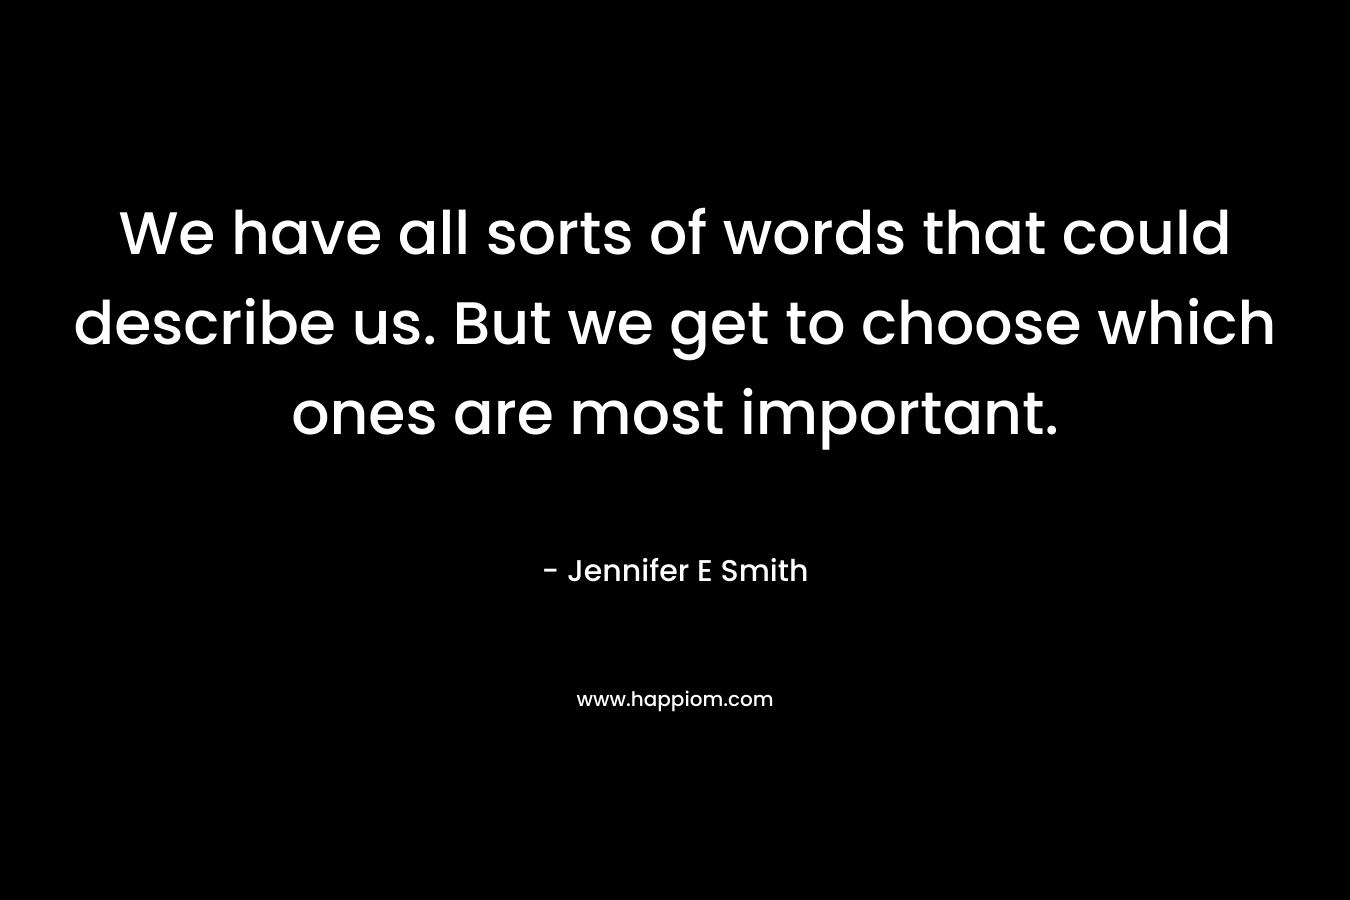 We have all sorts of words that could describe us. But we get to choose which ones are most important. – Jennifer E Smith